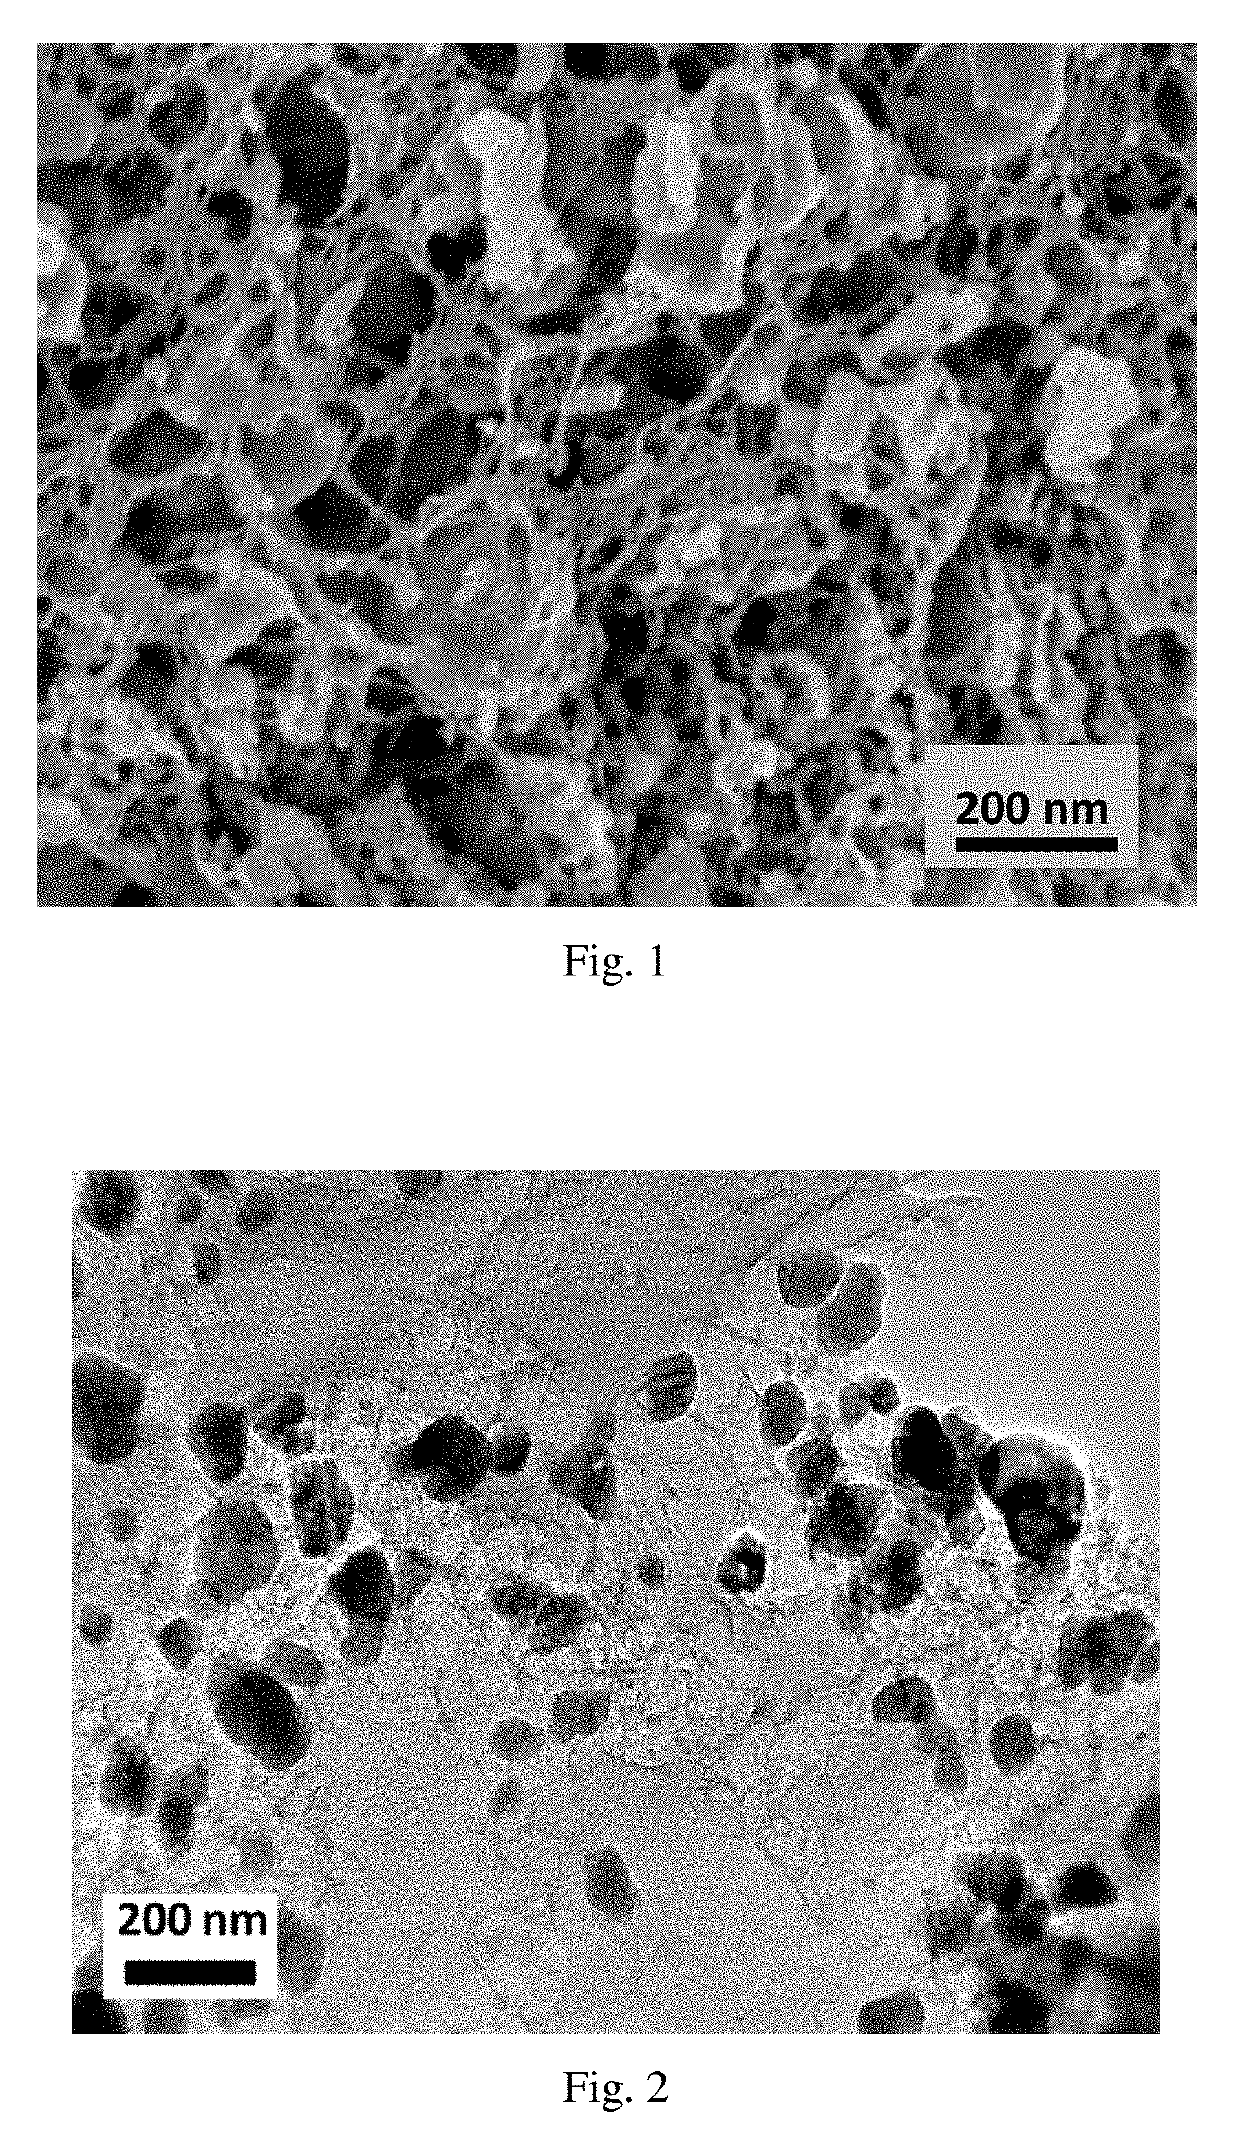 Three-Dimensional Lignin Porous Carbon/Zinc Oxide Composite Material and its Preparation and Application in the Field of Photocatalysis